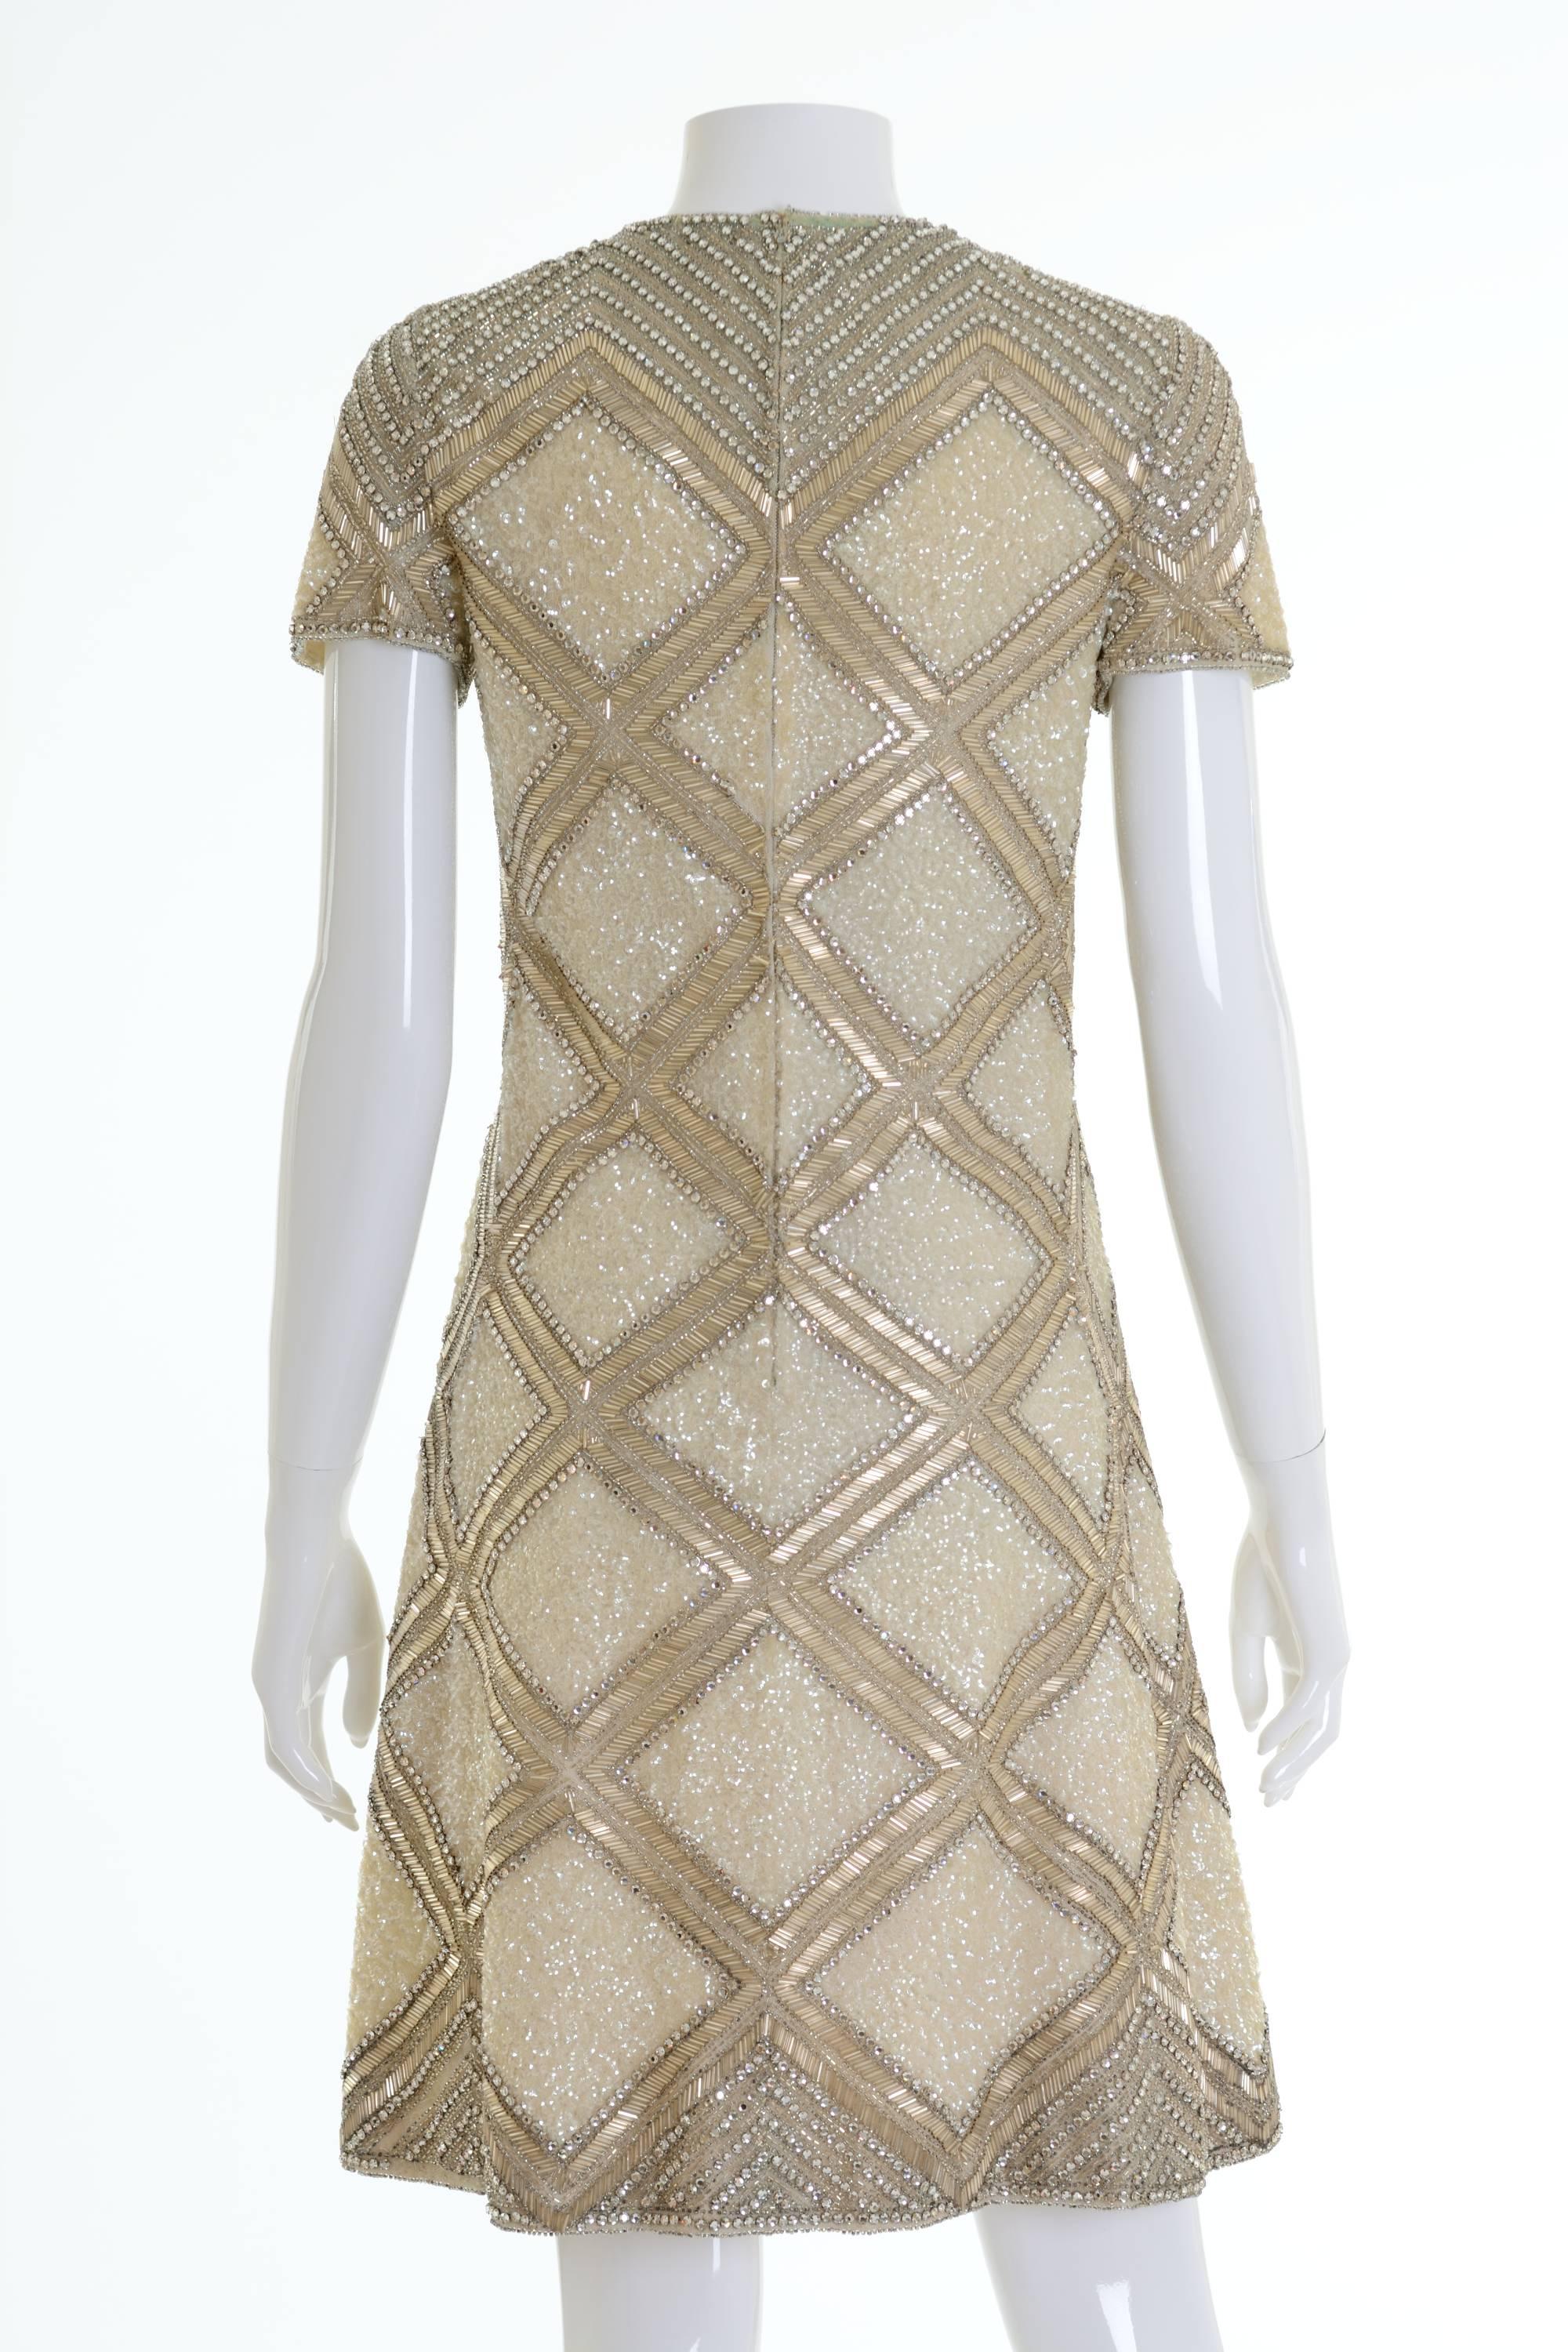 This amazing 1960s Mila Schön cocktail dress is in a fabulous silver tone sequins, rhinestones and glass beaded fabric. It's very heavy fabric and has back zip closure and is fully lined. 

Good vintage condition

Label: Mila Schön - Made in